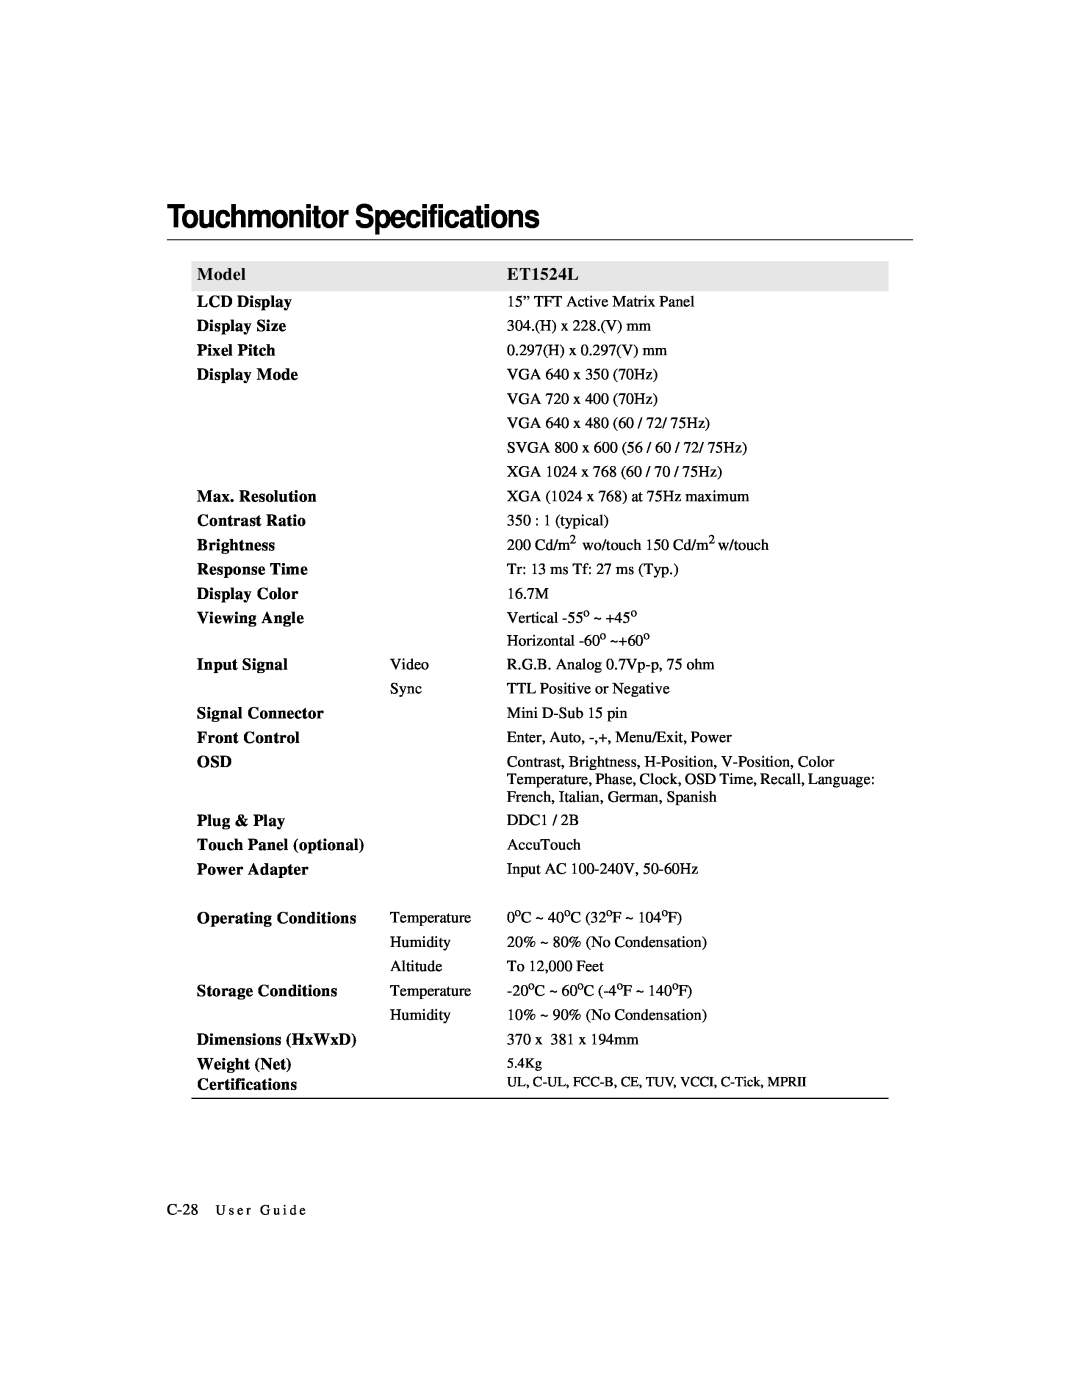 Elo TouchSystems manual Touchmonitor Specifications, Model, ET1524L 